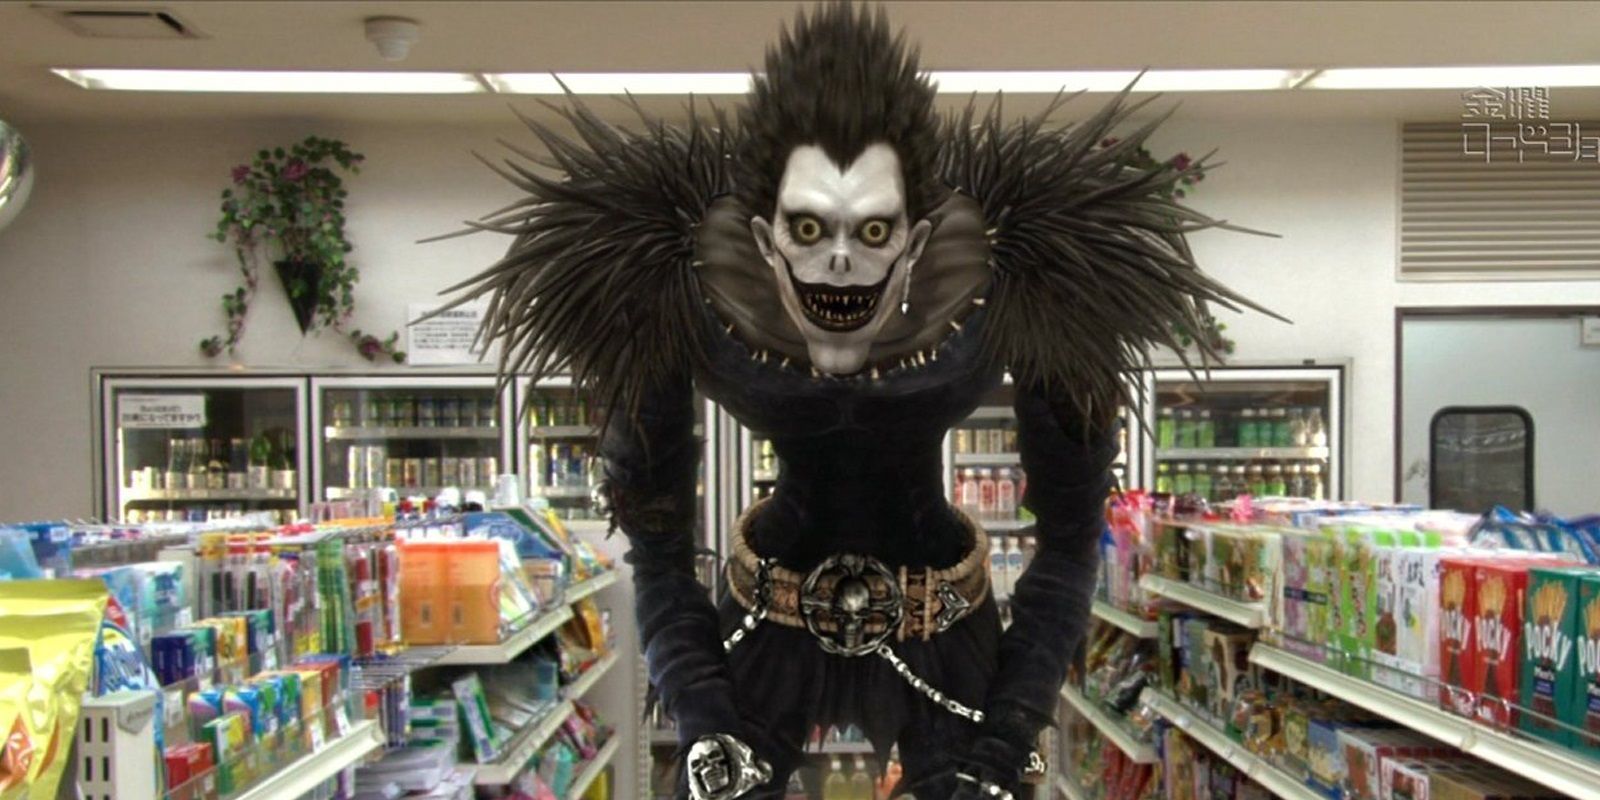 Death Note Writer Says the Movie is 'Heat with Teenagers'